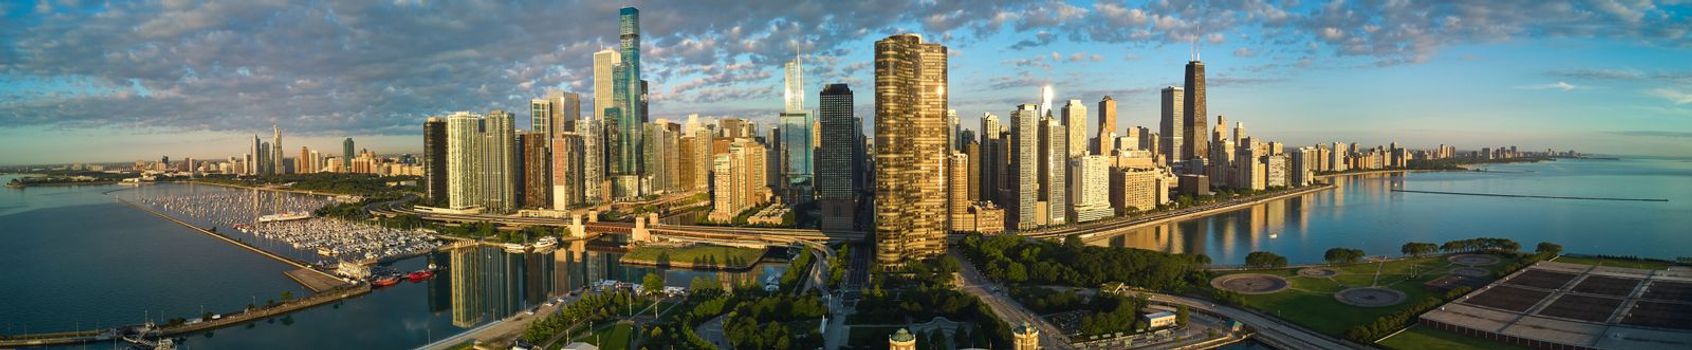 Image of Wide panorama of Chicago city skyline from aerial view at Navy Pier during sunrise